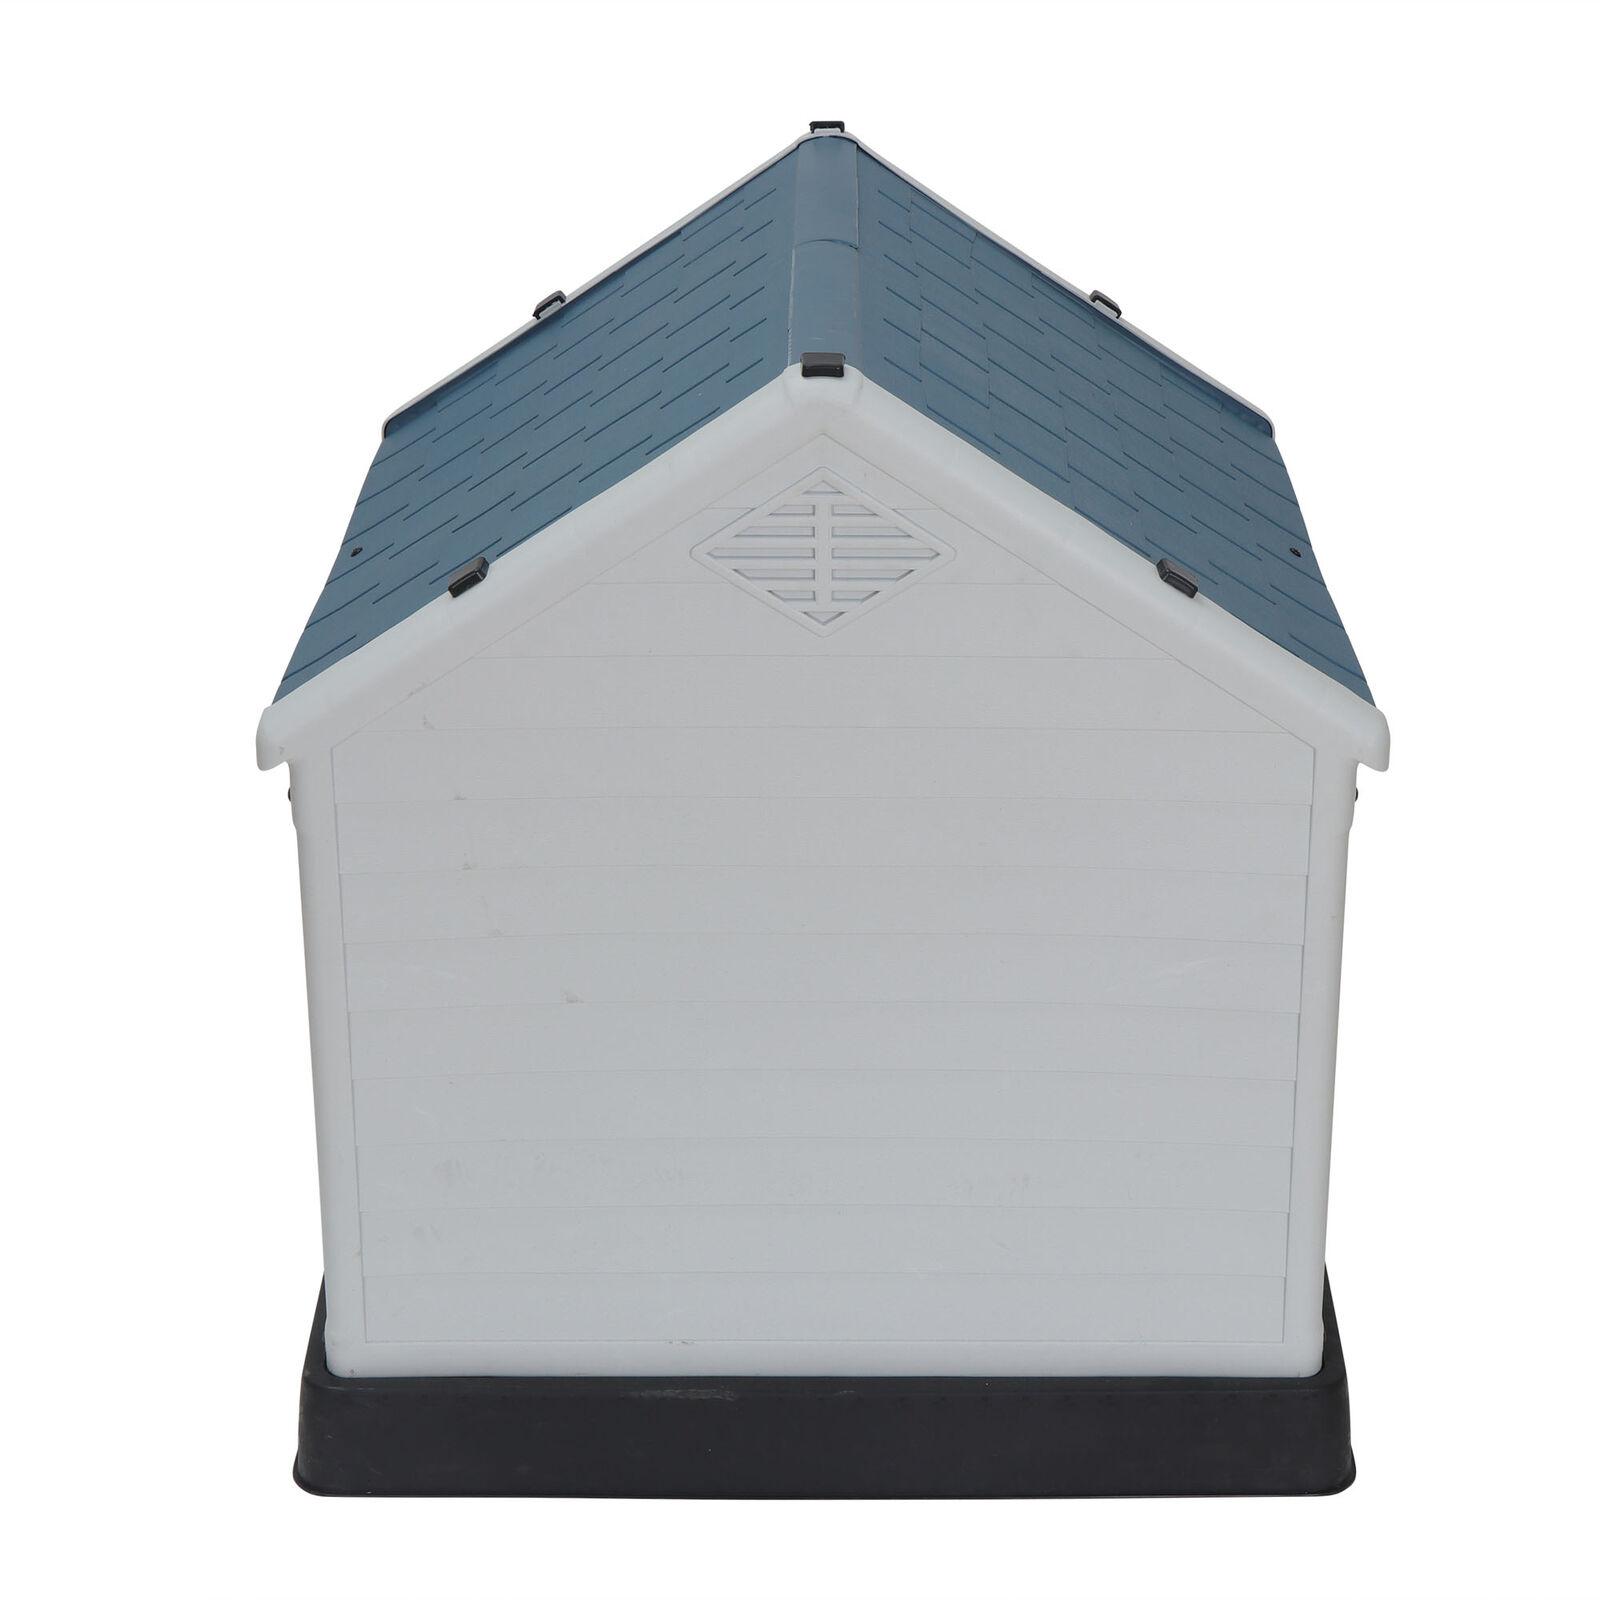 thinkstar Sturdy Dog House For Long Time Use Water Resistant Comfortable Cool Shelter